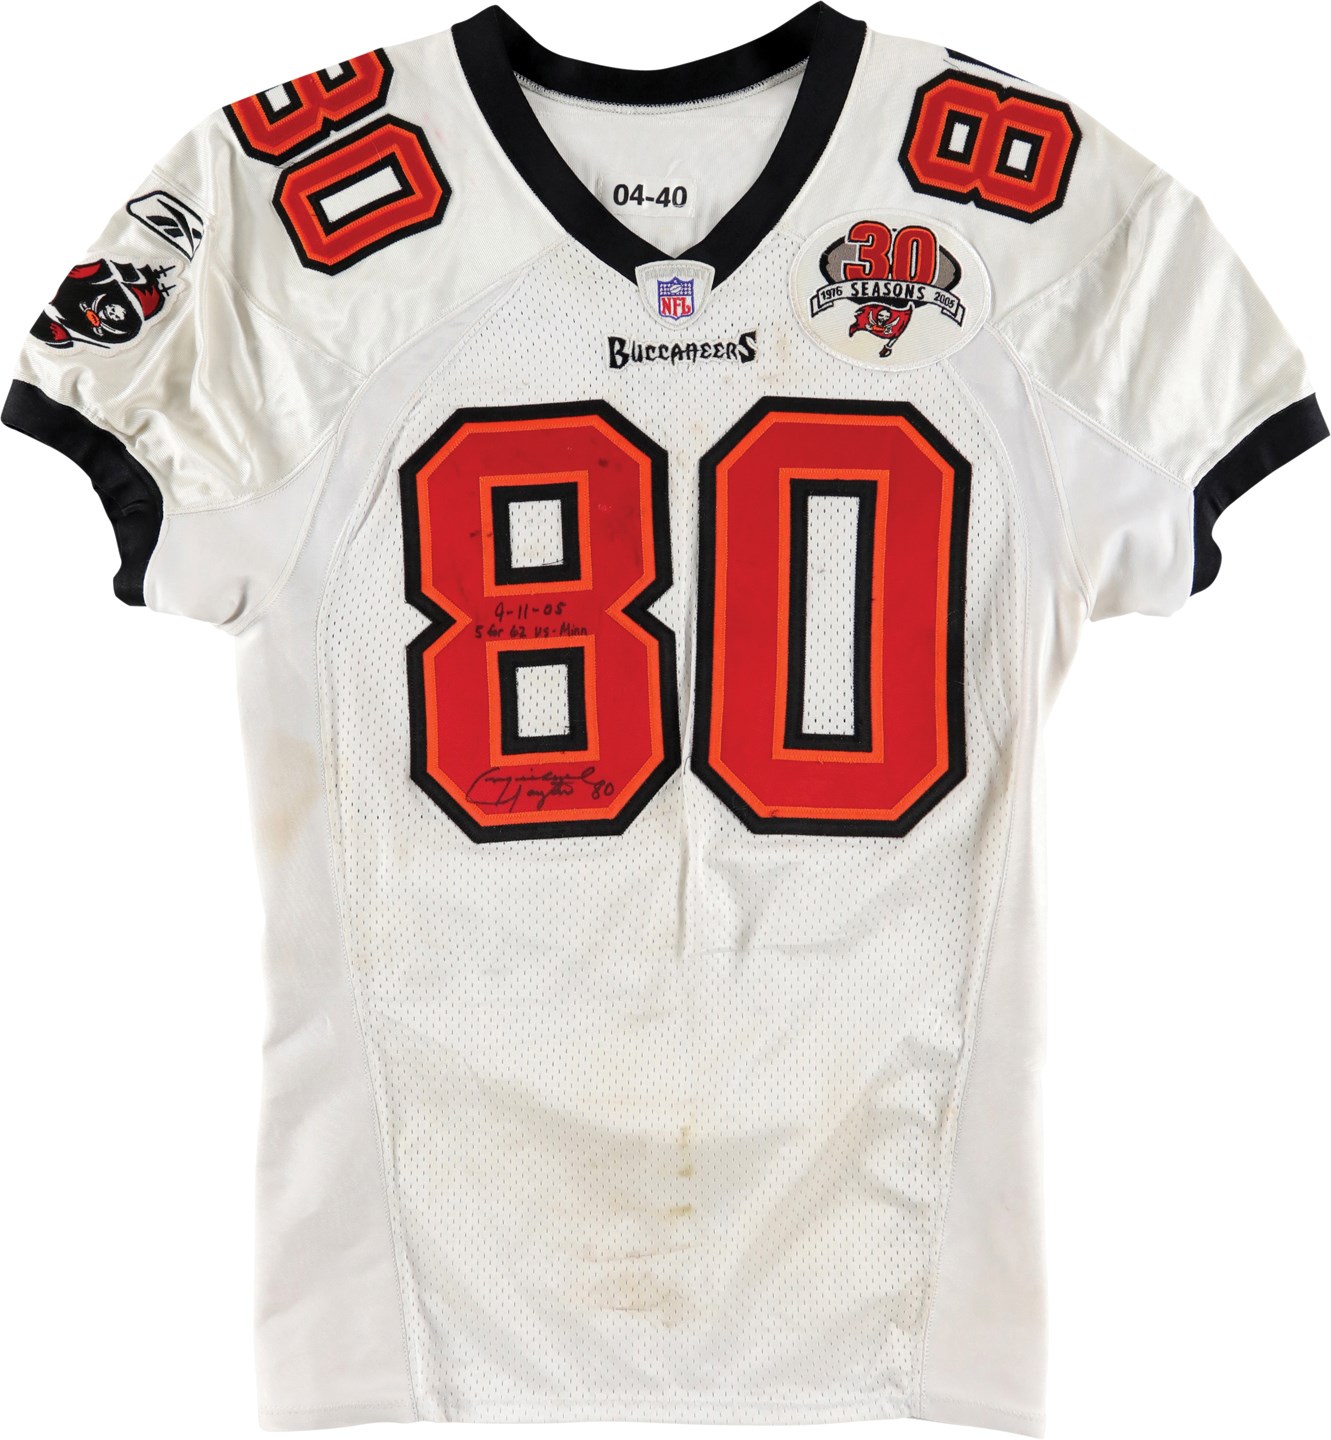 Football - 9/11/05 Michael Clayton Unwashed Tampa Bay Buccaneers Game Worn Jersey with 30th Anniversary Patch